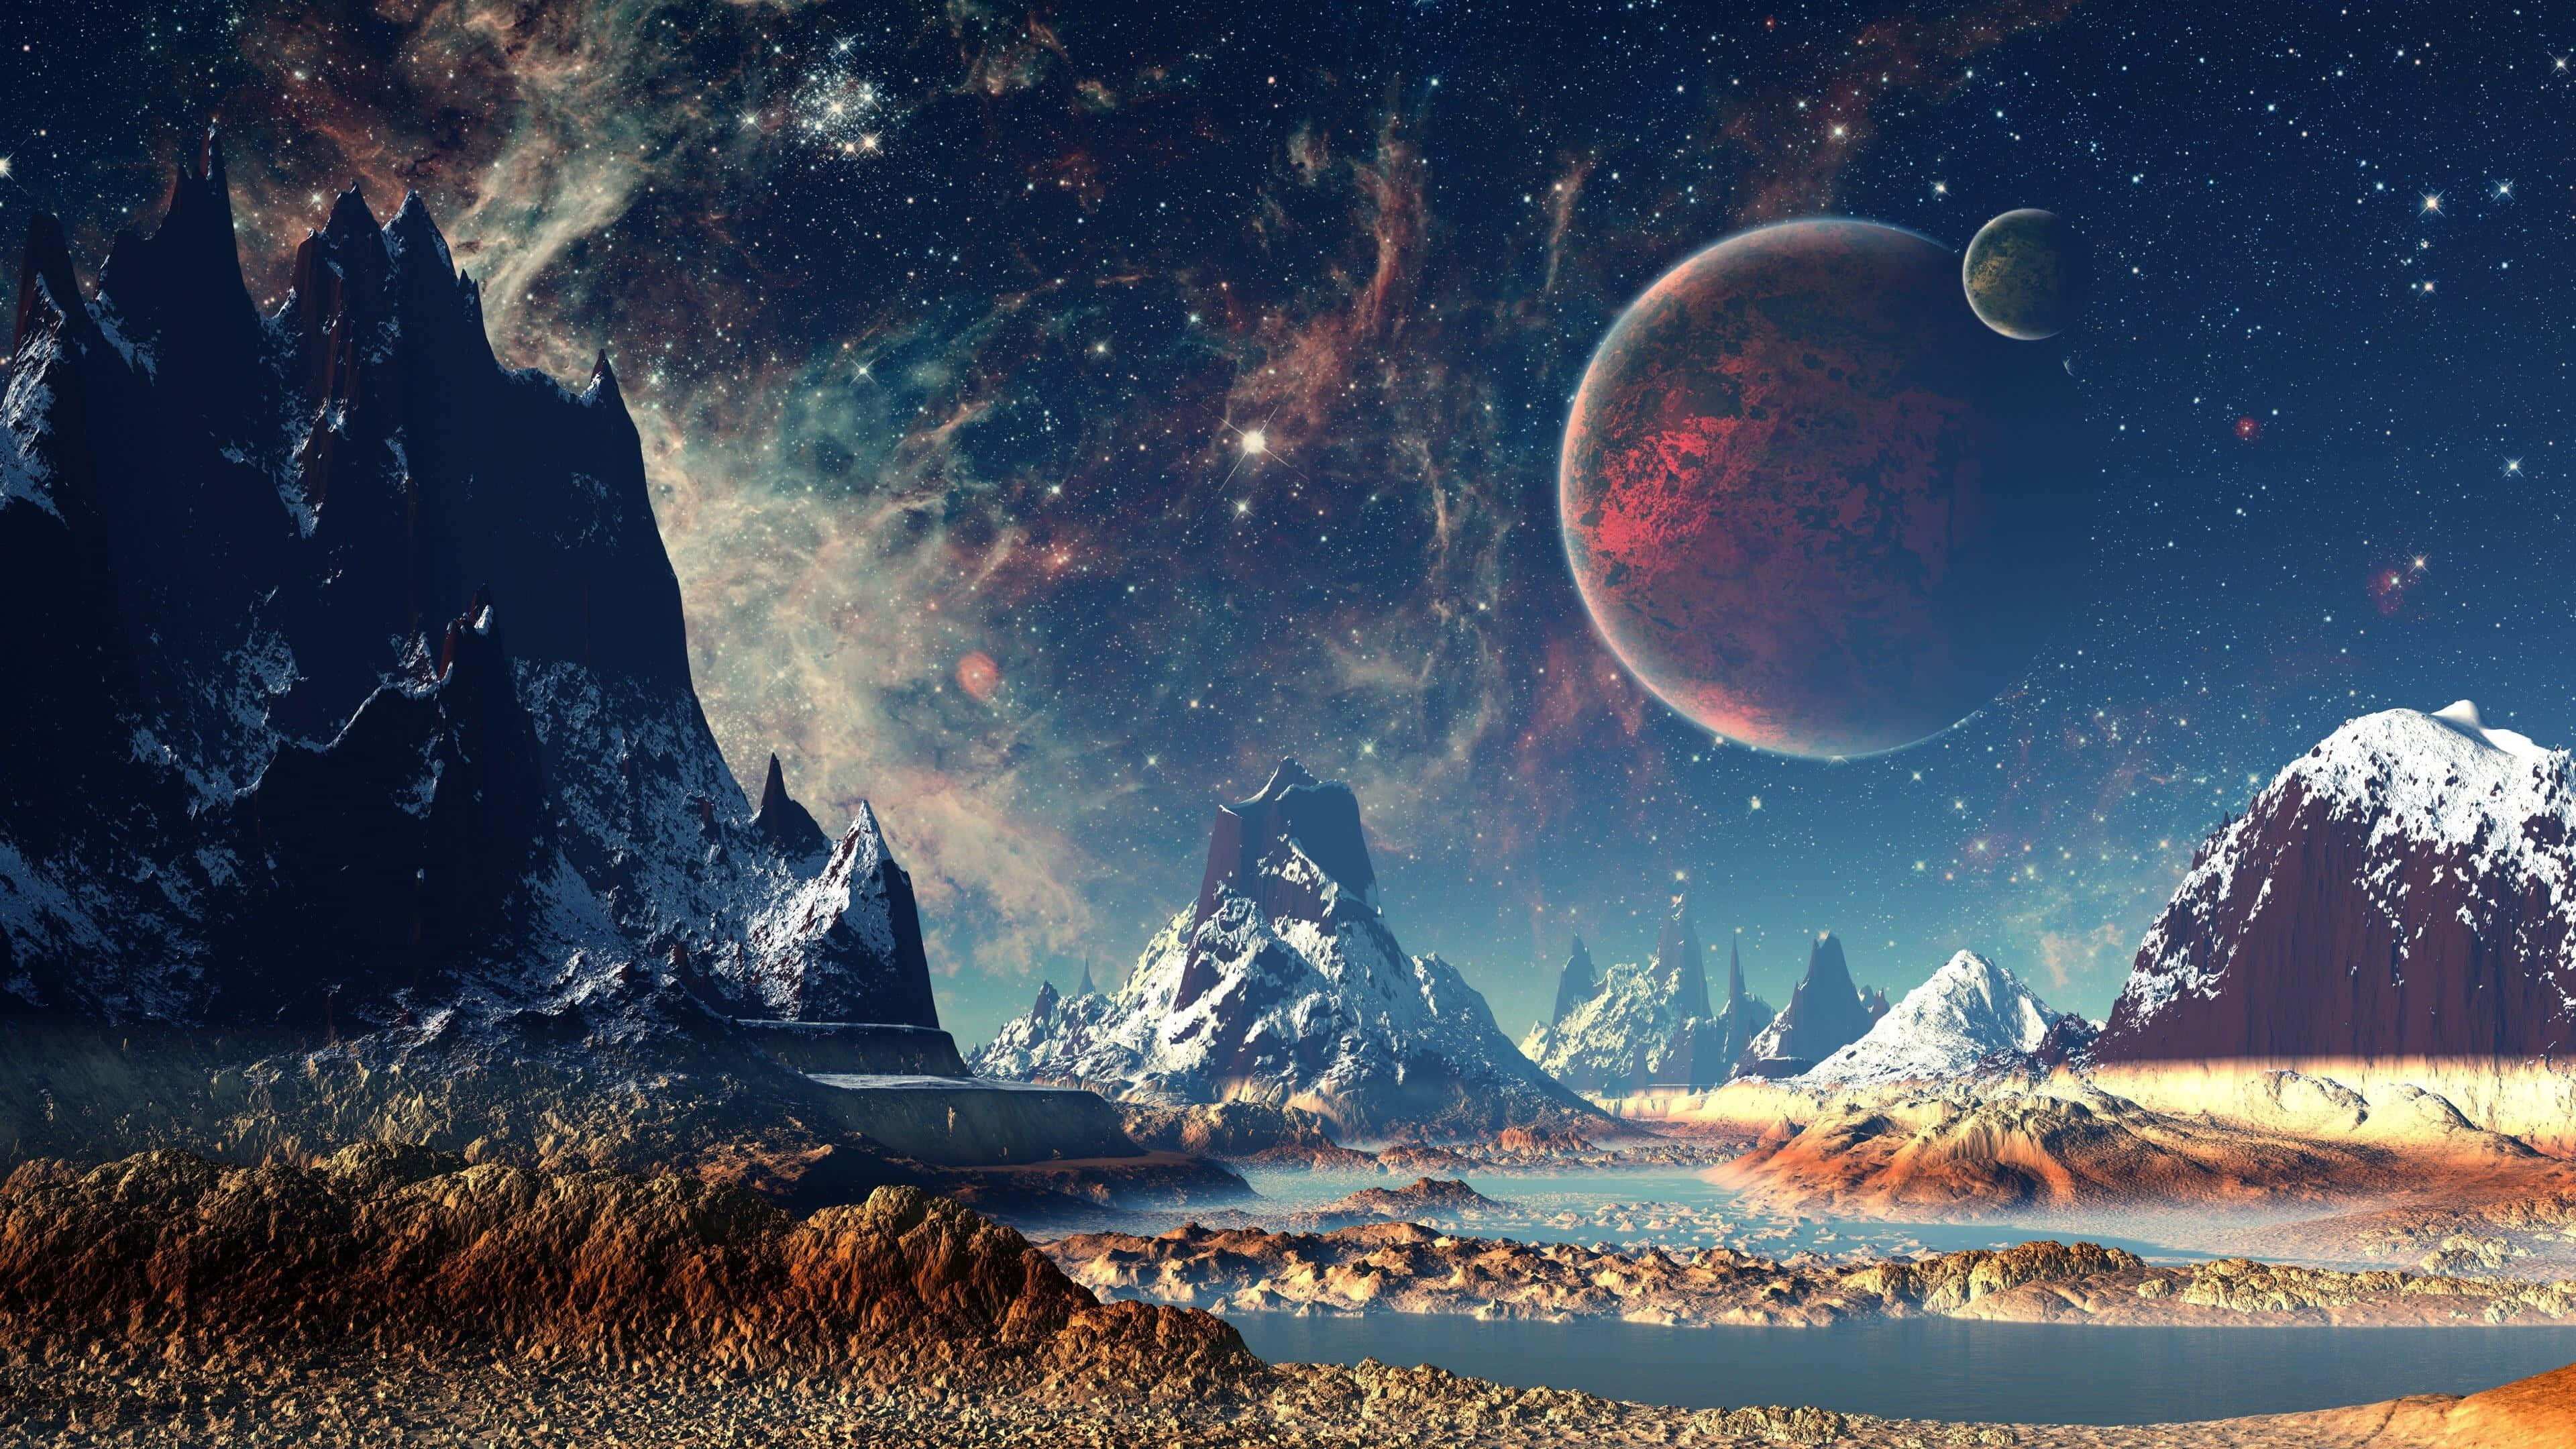 Enter the Mystical World of Fantasy Space Wallpaper